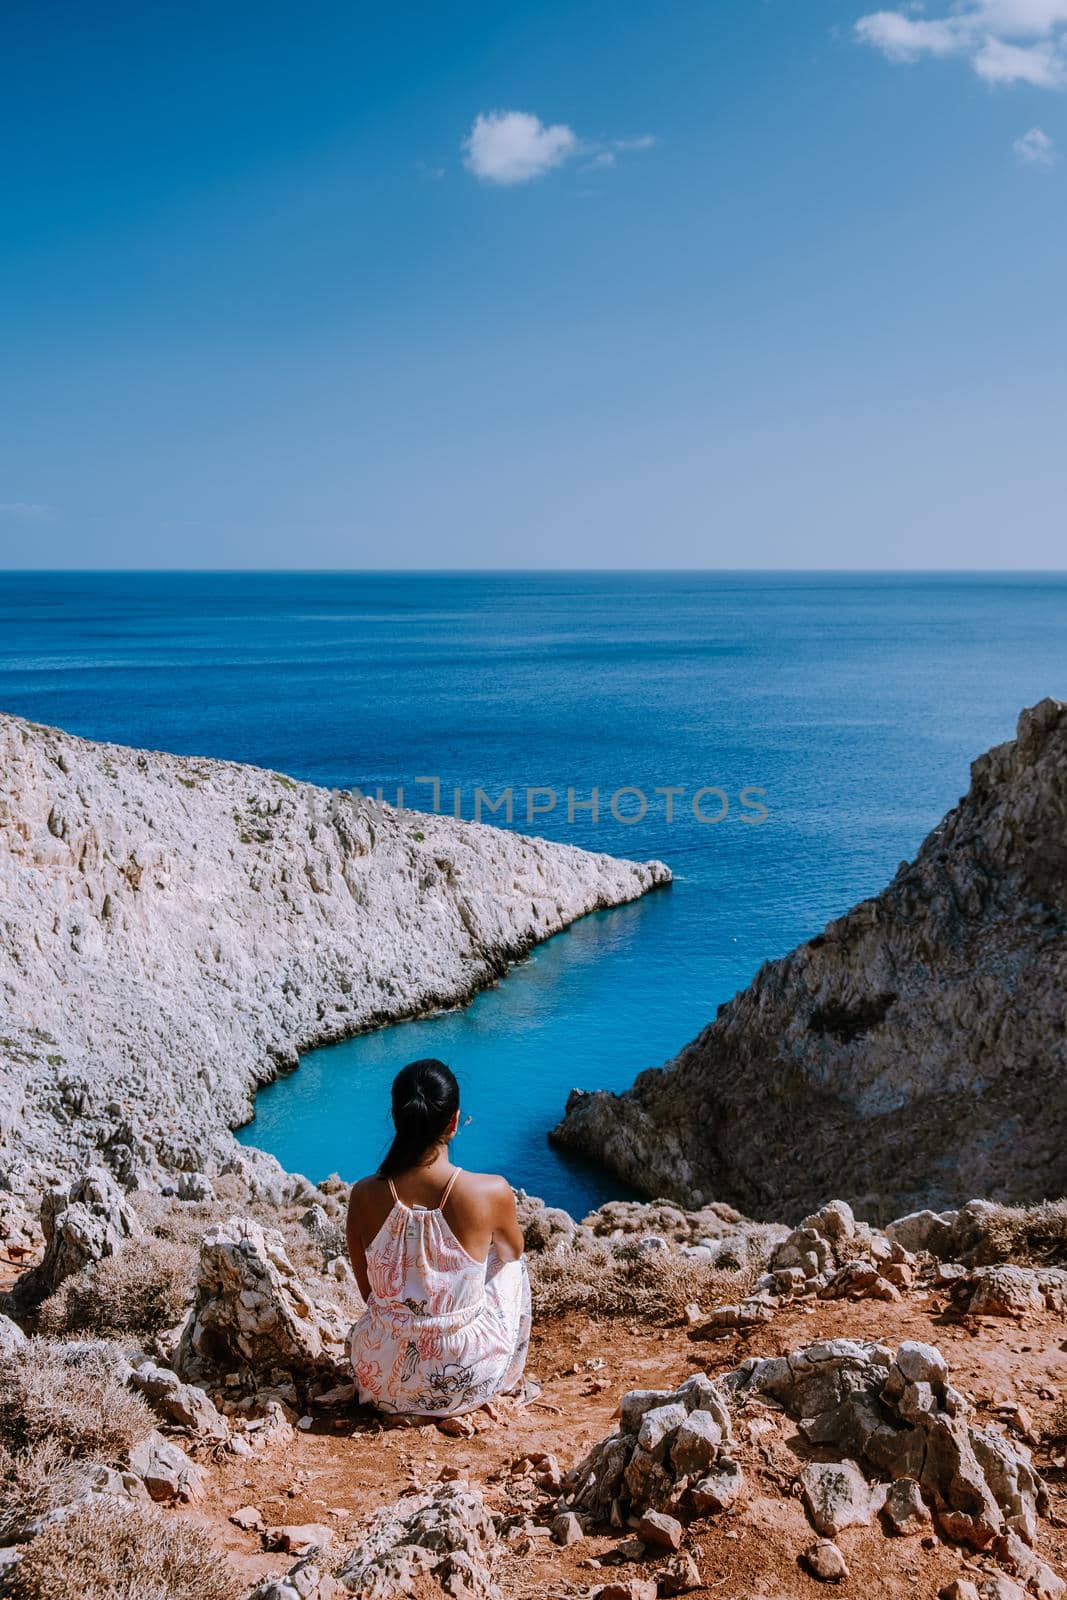 Crete Greece Seitan Limania beach with huge cliff by the blue ocean of the Island of Crete in Greece, Seitan limania beach on Crete, Greece. Europe young woman mid age asian looking out over ocean during vacation